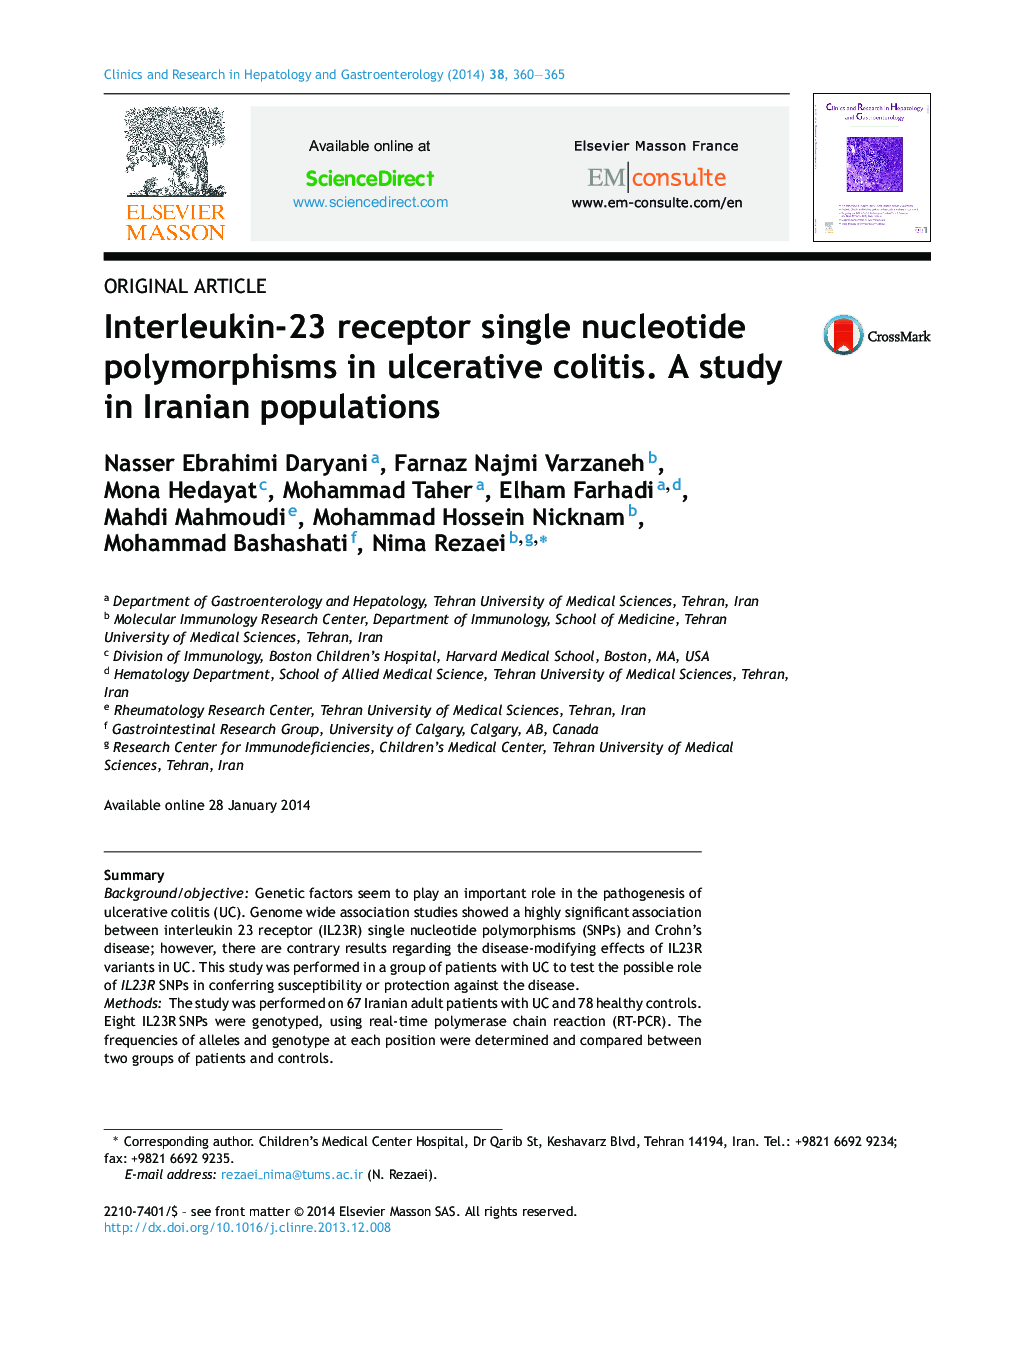 Interleukin-23 receptor single nucleotide polymorphisms in ulcerative colitis. A study in Iranian populations